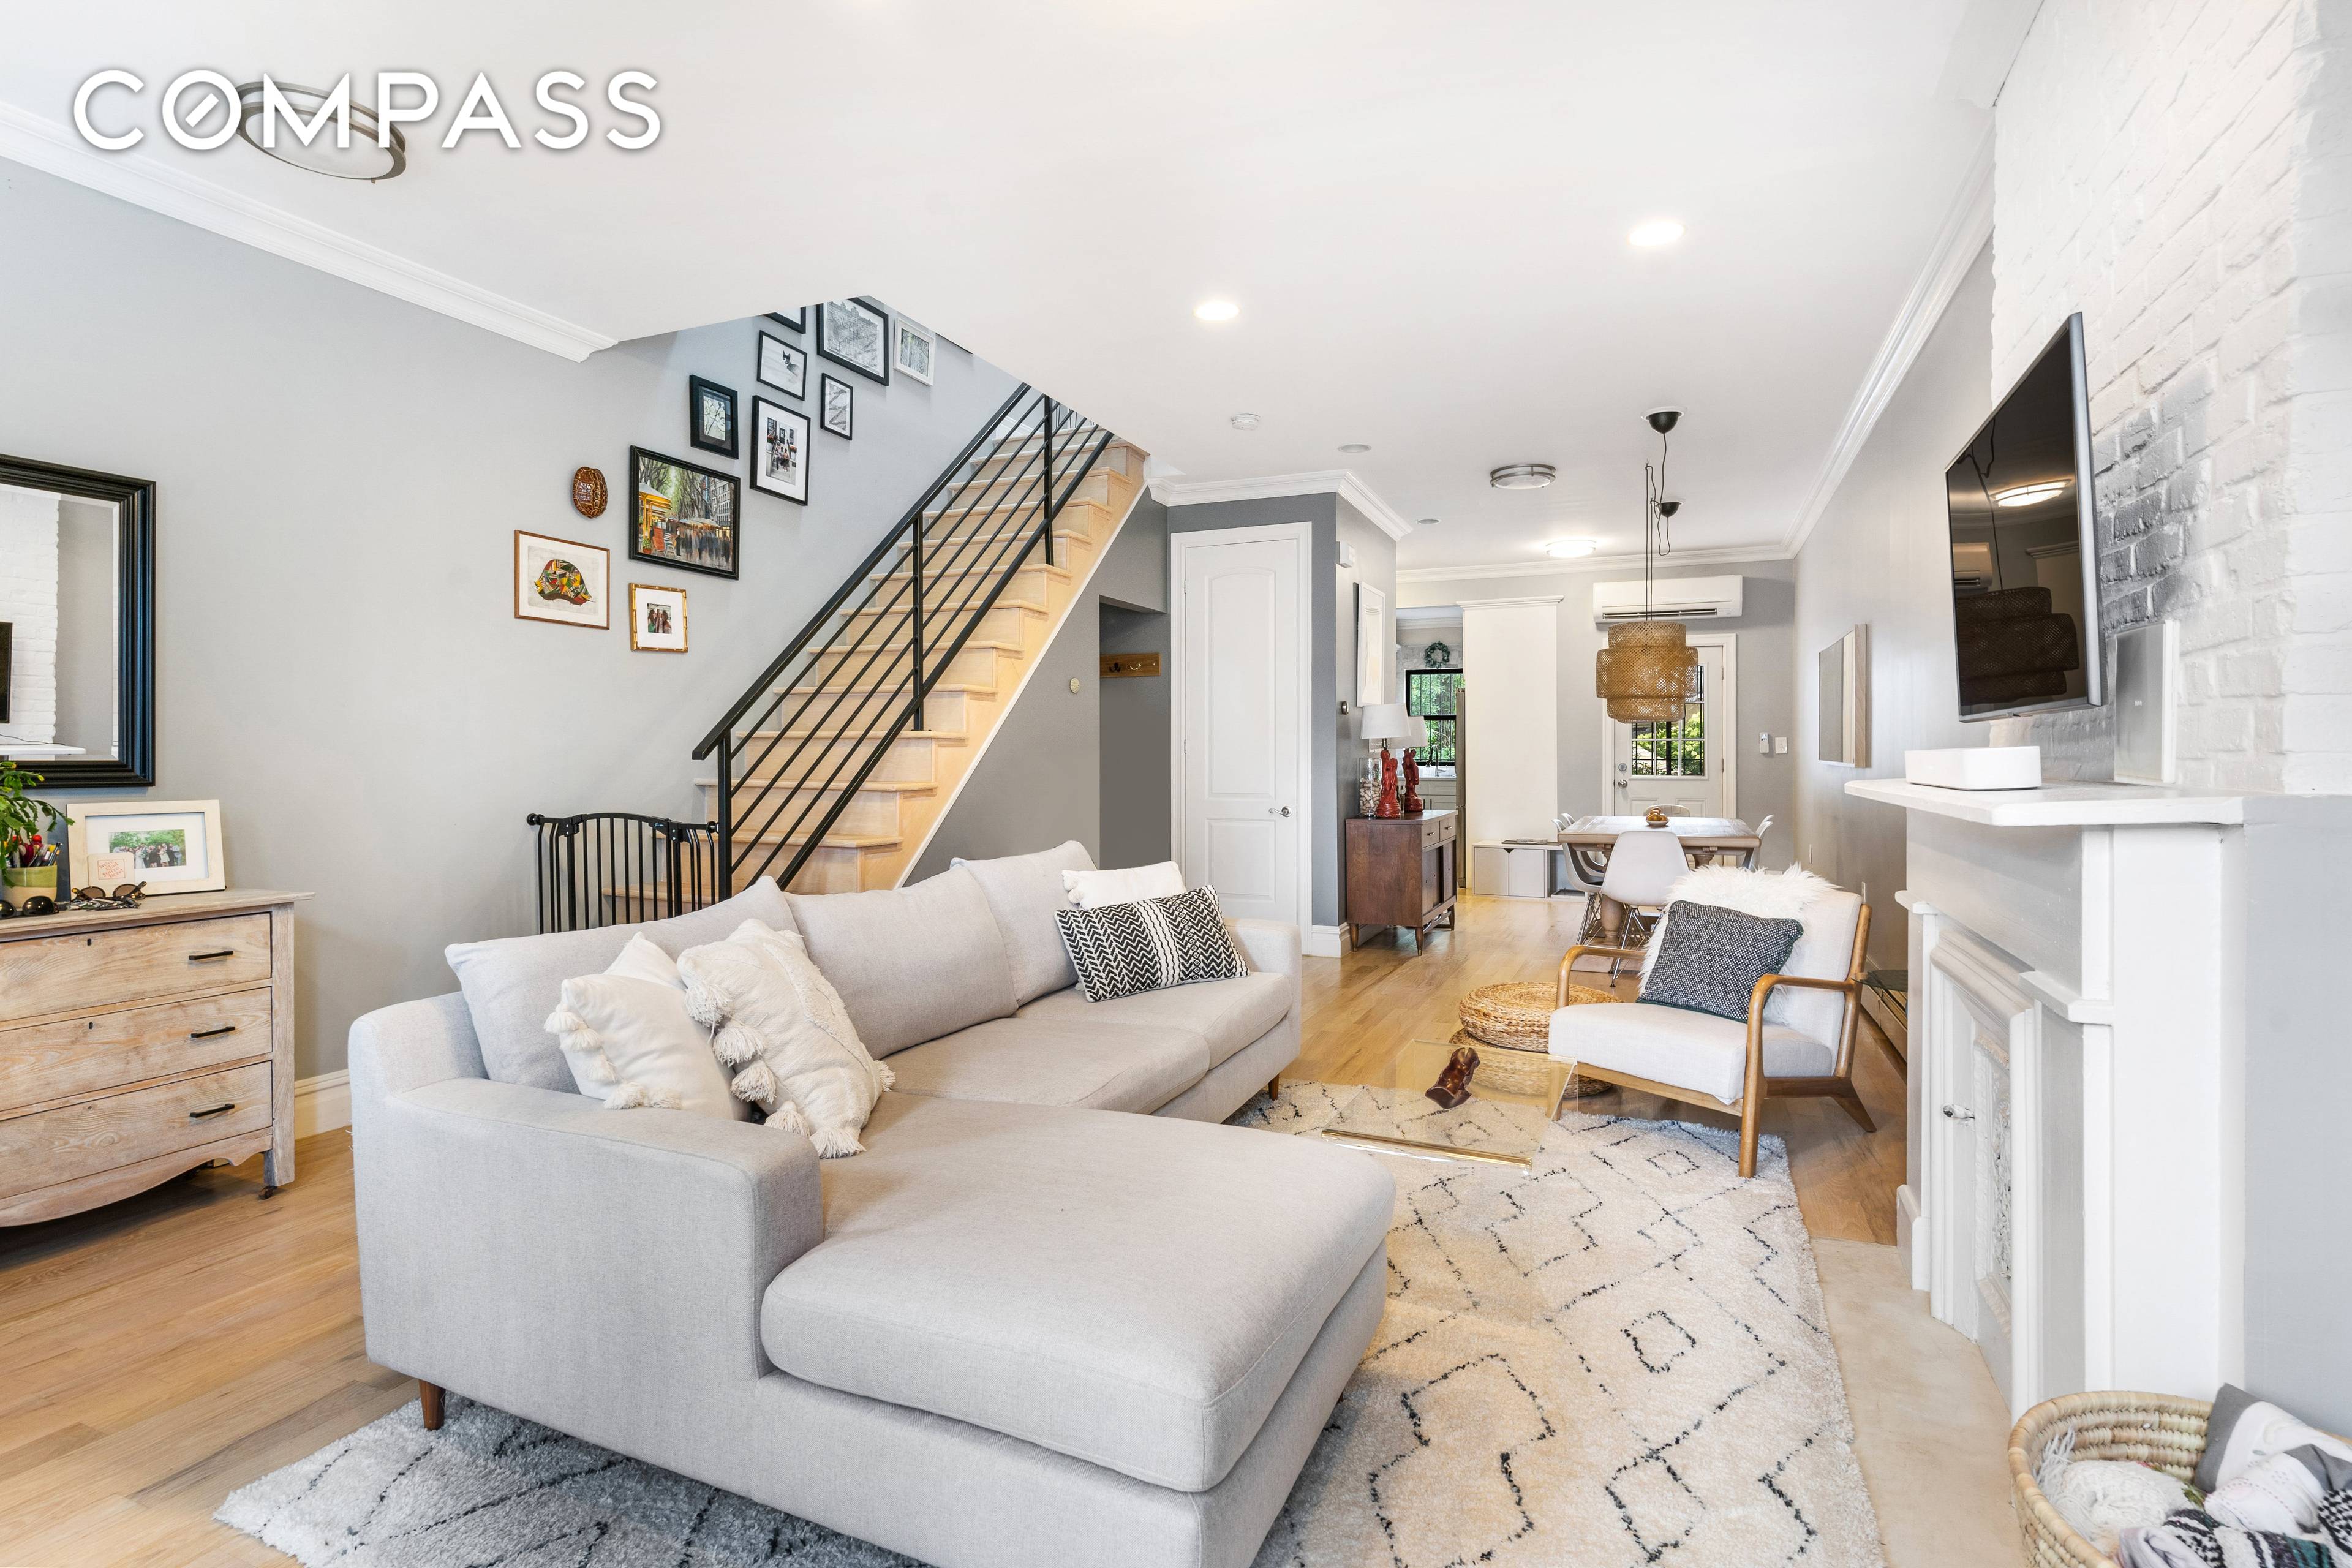 Enjoy outstanding Brooklyn living in this beautifully updated three bedroom, two and a half bathroom duplex located in emerging Ocean Hill, neighboring Stuyvesant Heights.